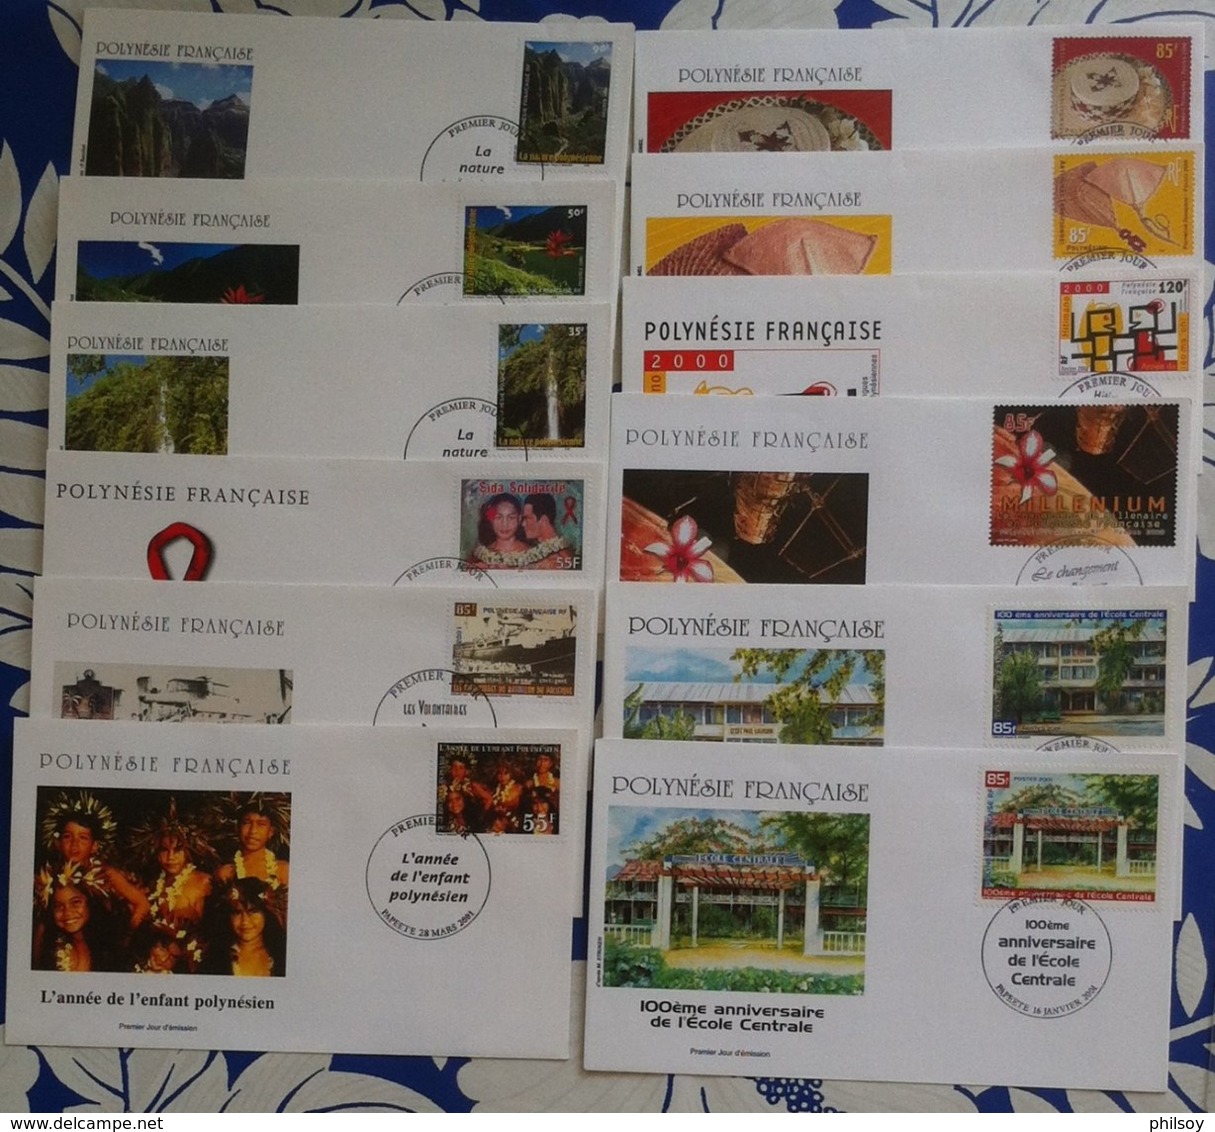 POLYNESIE FRANCAISE 12 FDC 2000/2001 - Collections, Lots & Séries